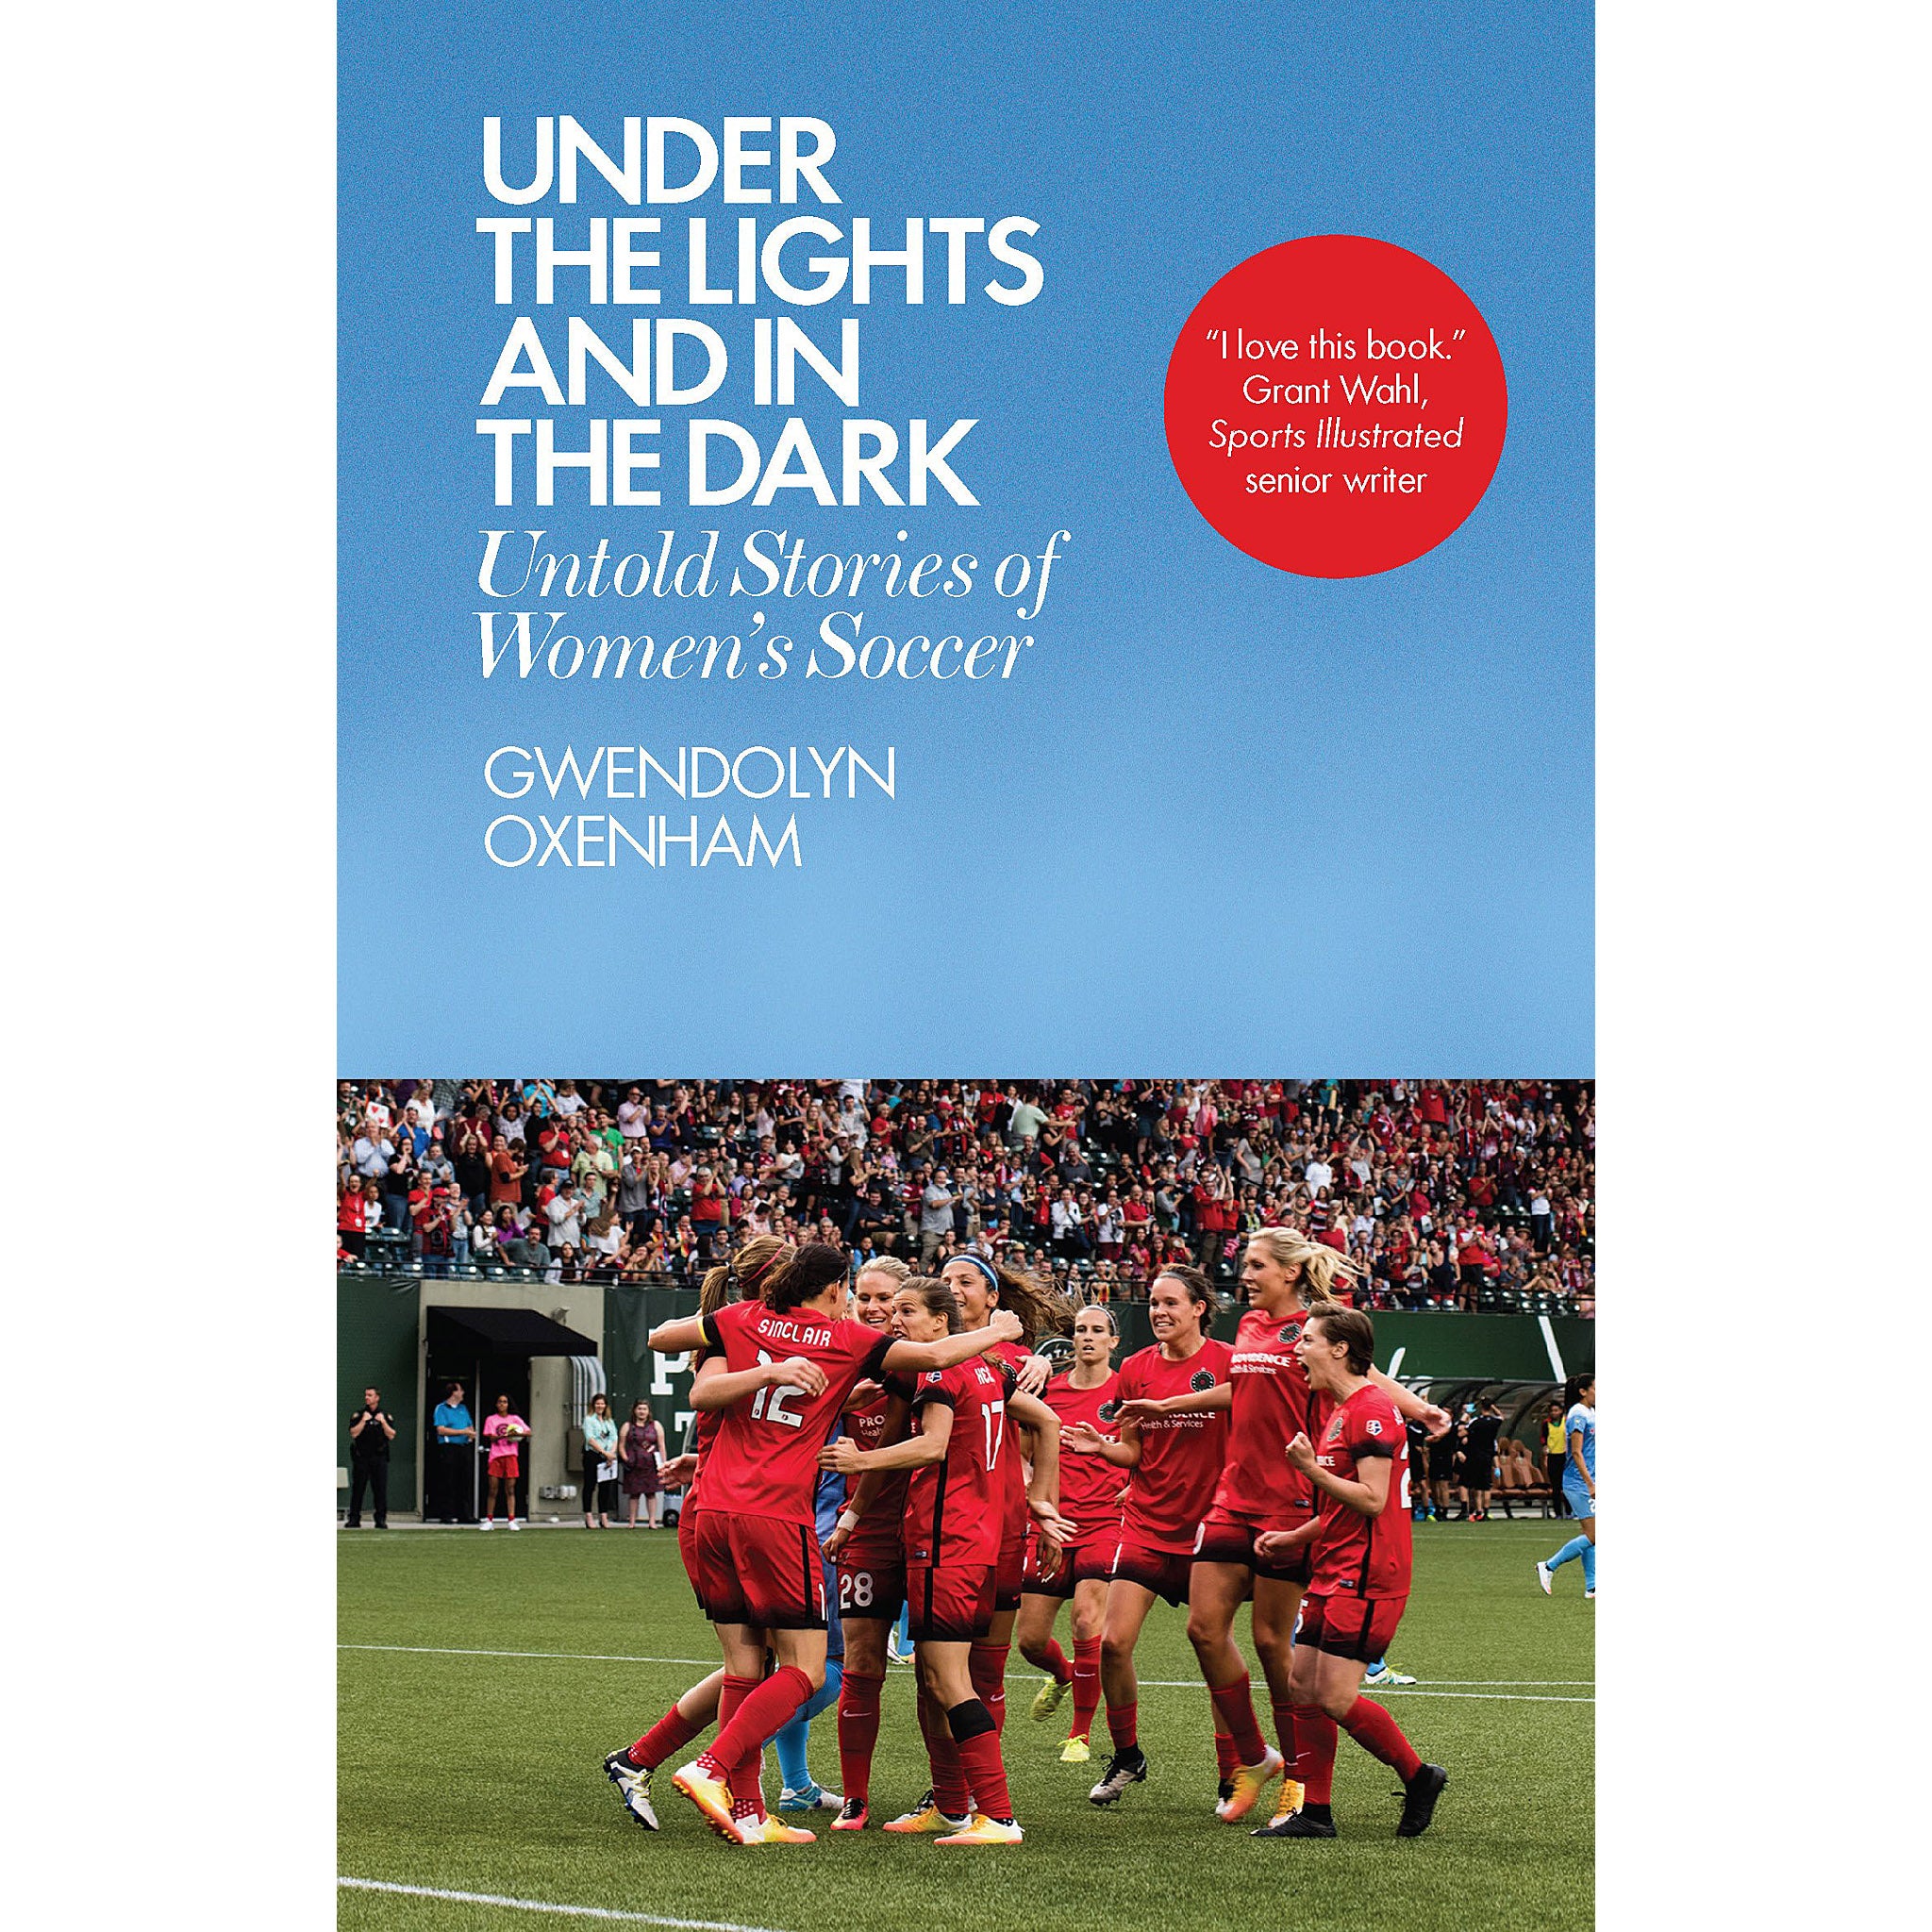 Under the Lights and in the Dark – Untold Stories of Women's Soccer